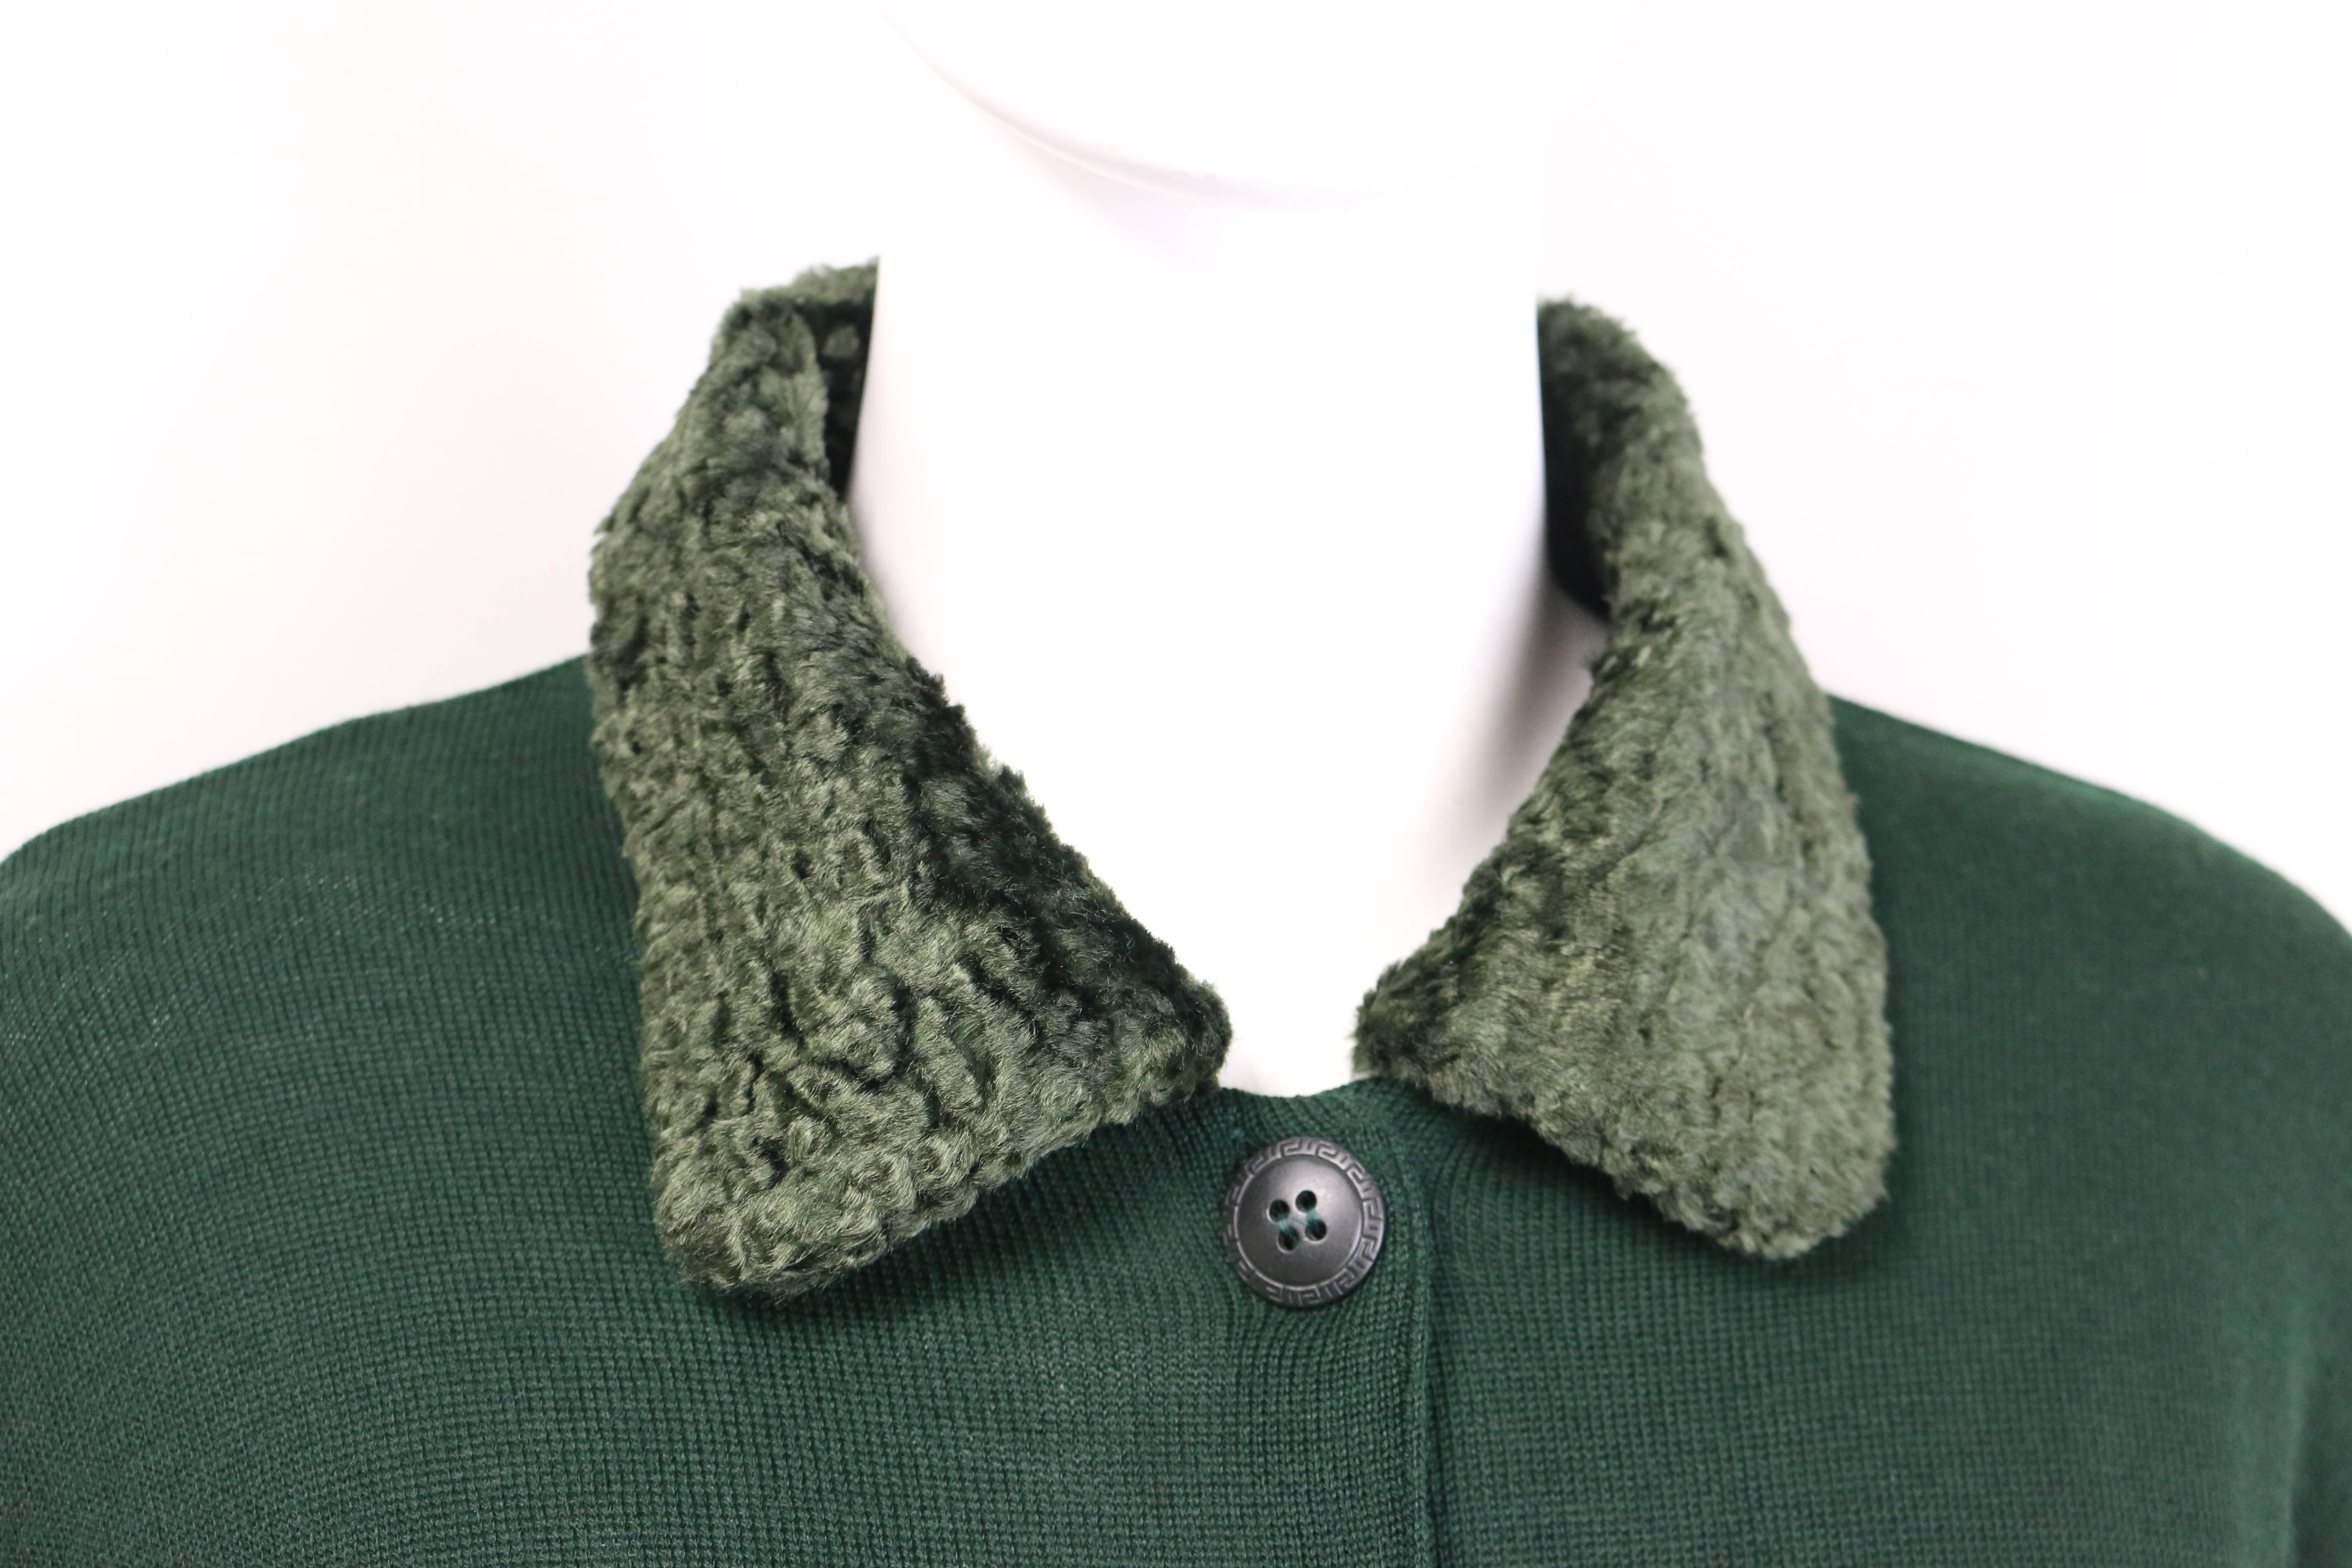 - Vintage 90s Gianni Versace Jeans Couture green wool cardigan. Featuring a green faux fur collar, five black metal hardware buttons closure, two welt pockets. A well made wool cardigan that is brand new with original tag attached. 

- Made in